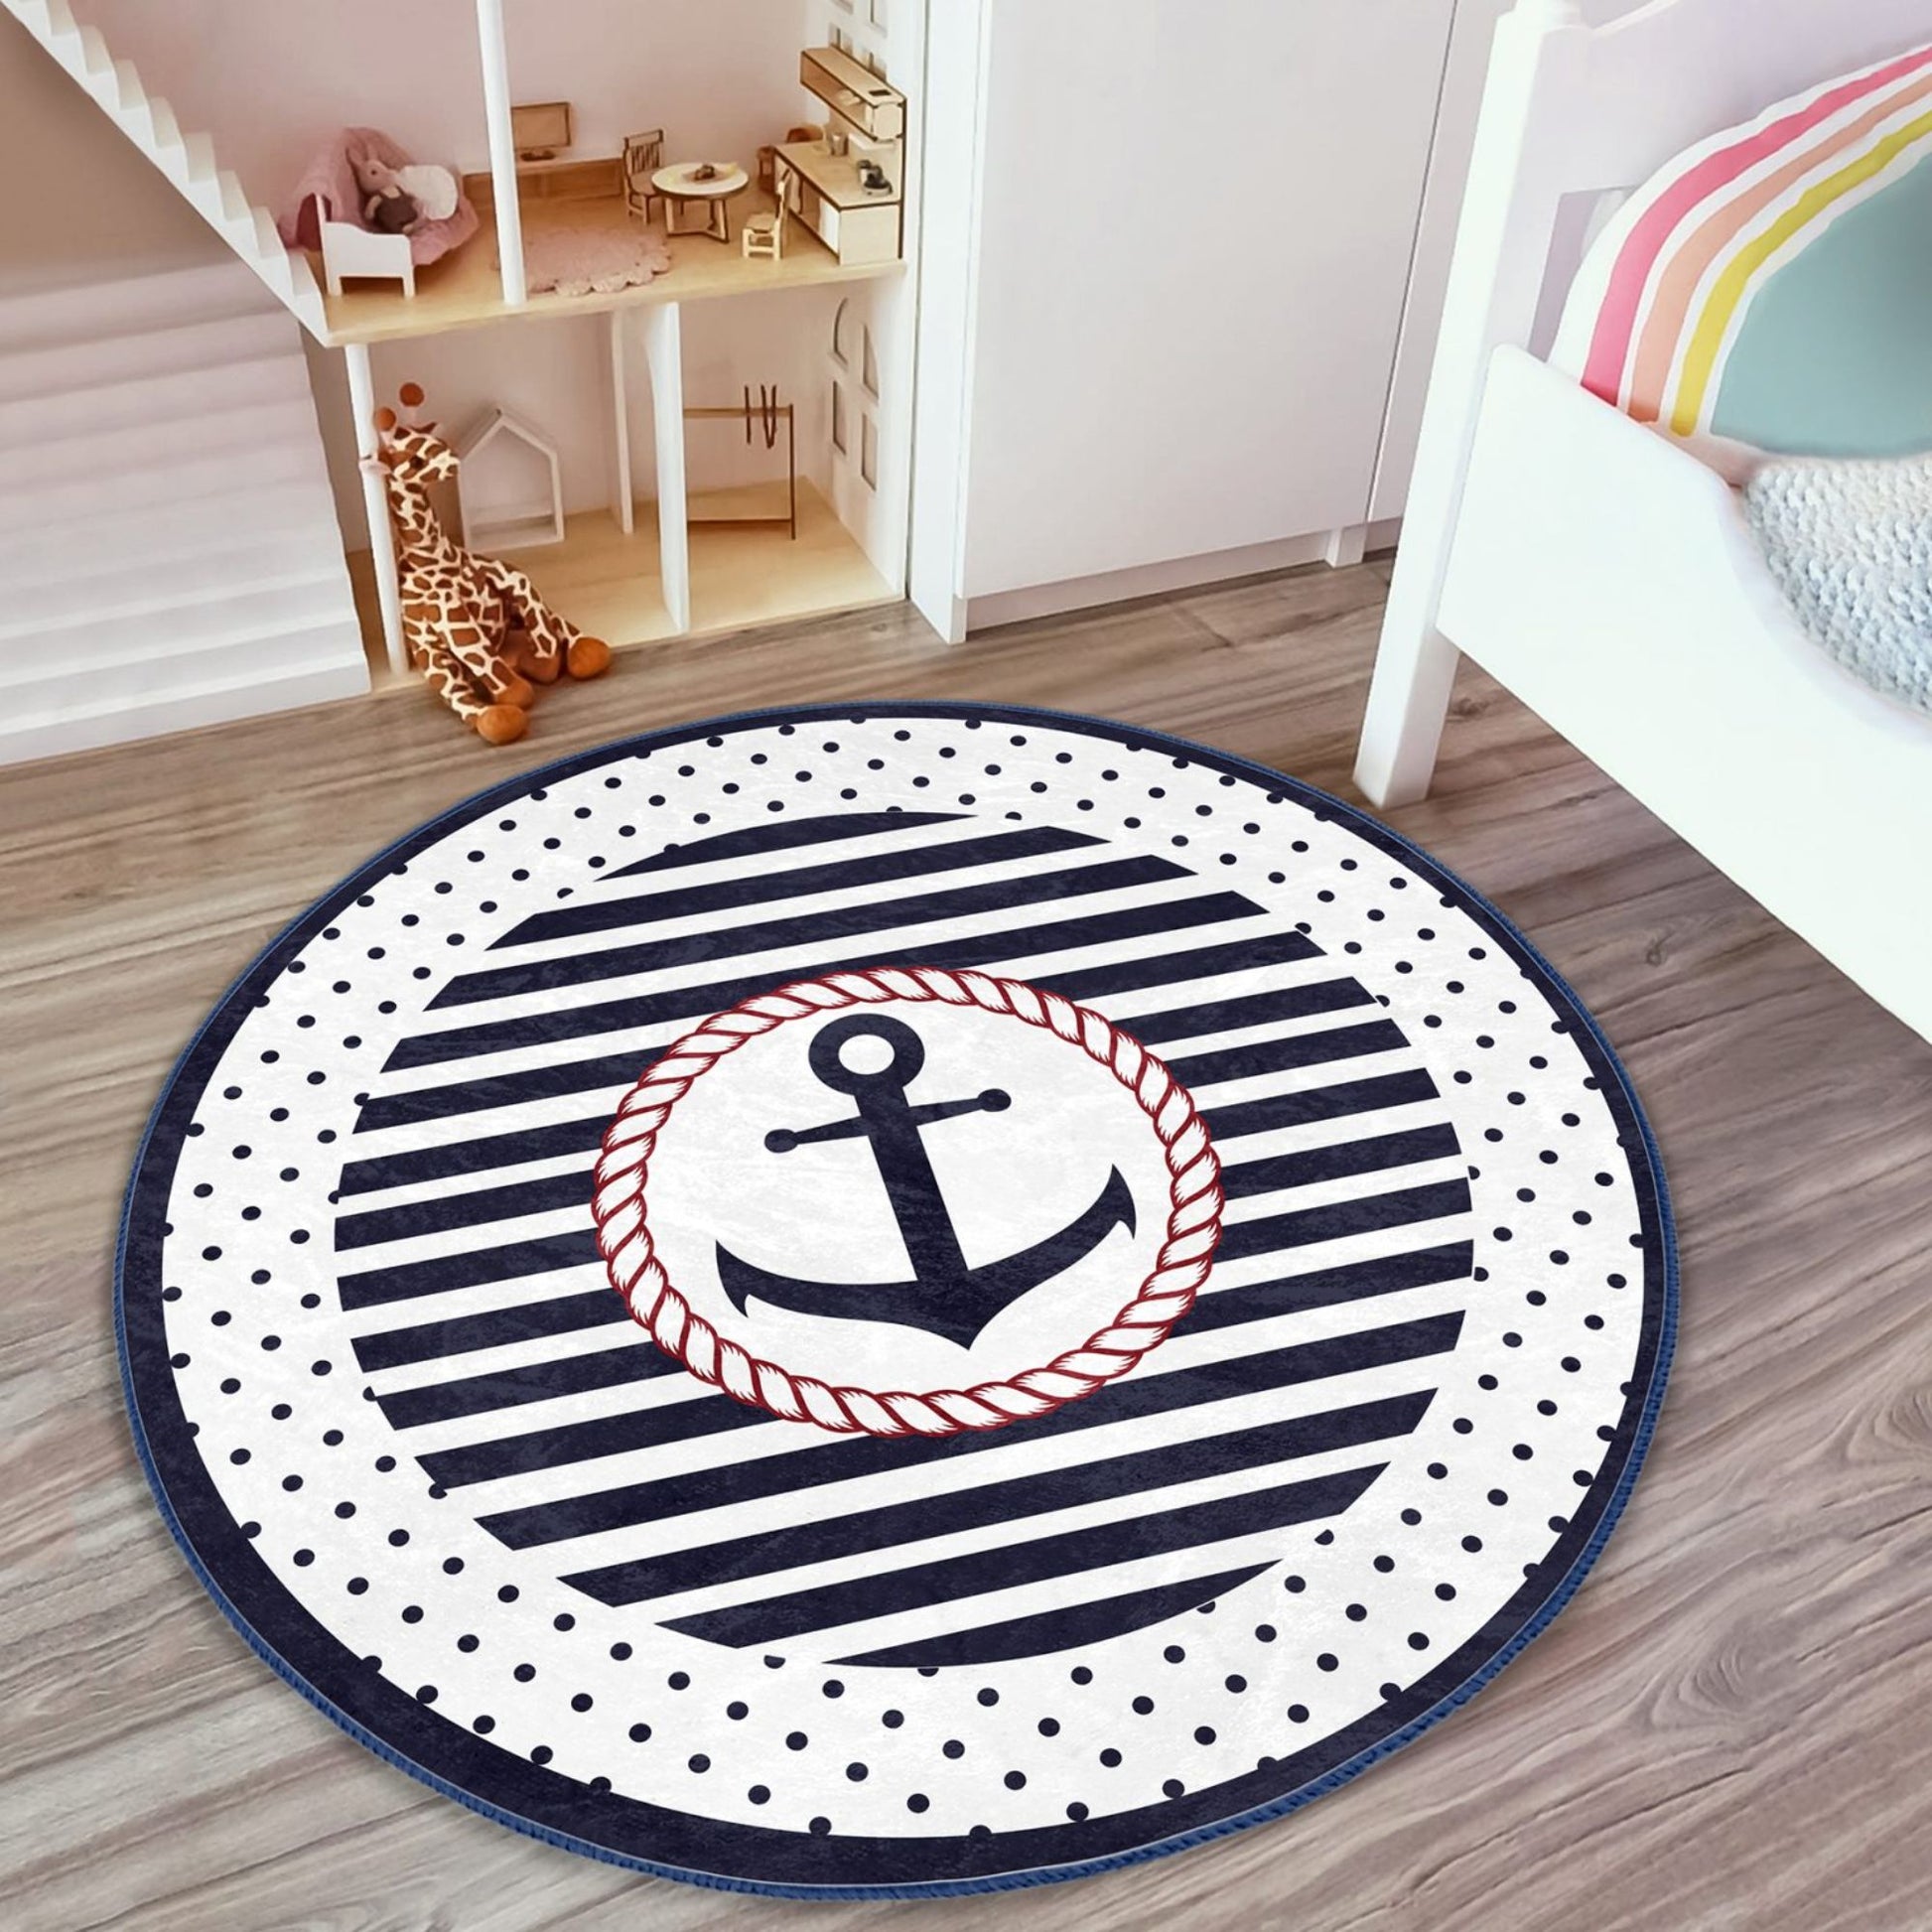 Rug with Nautical Theme for Kids Play Area